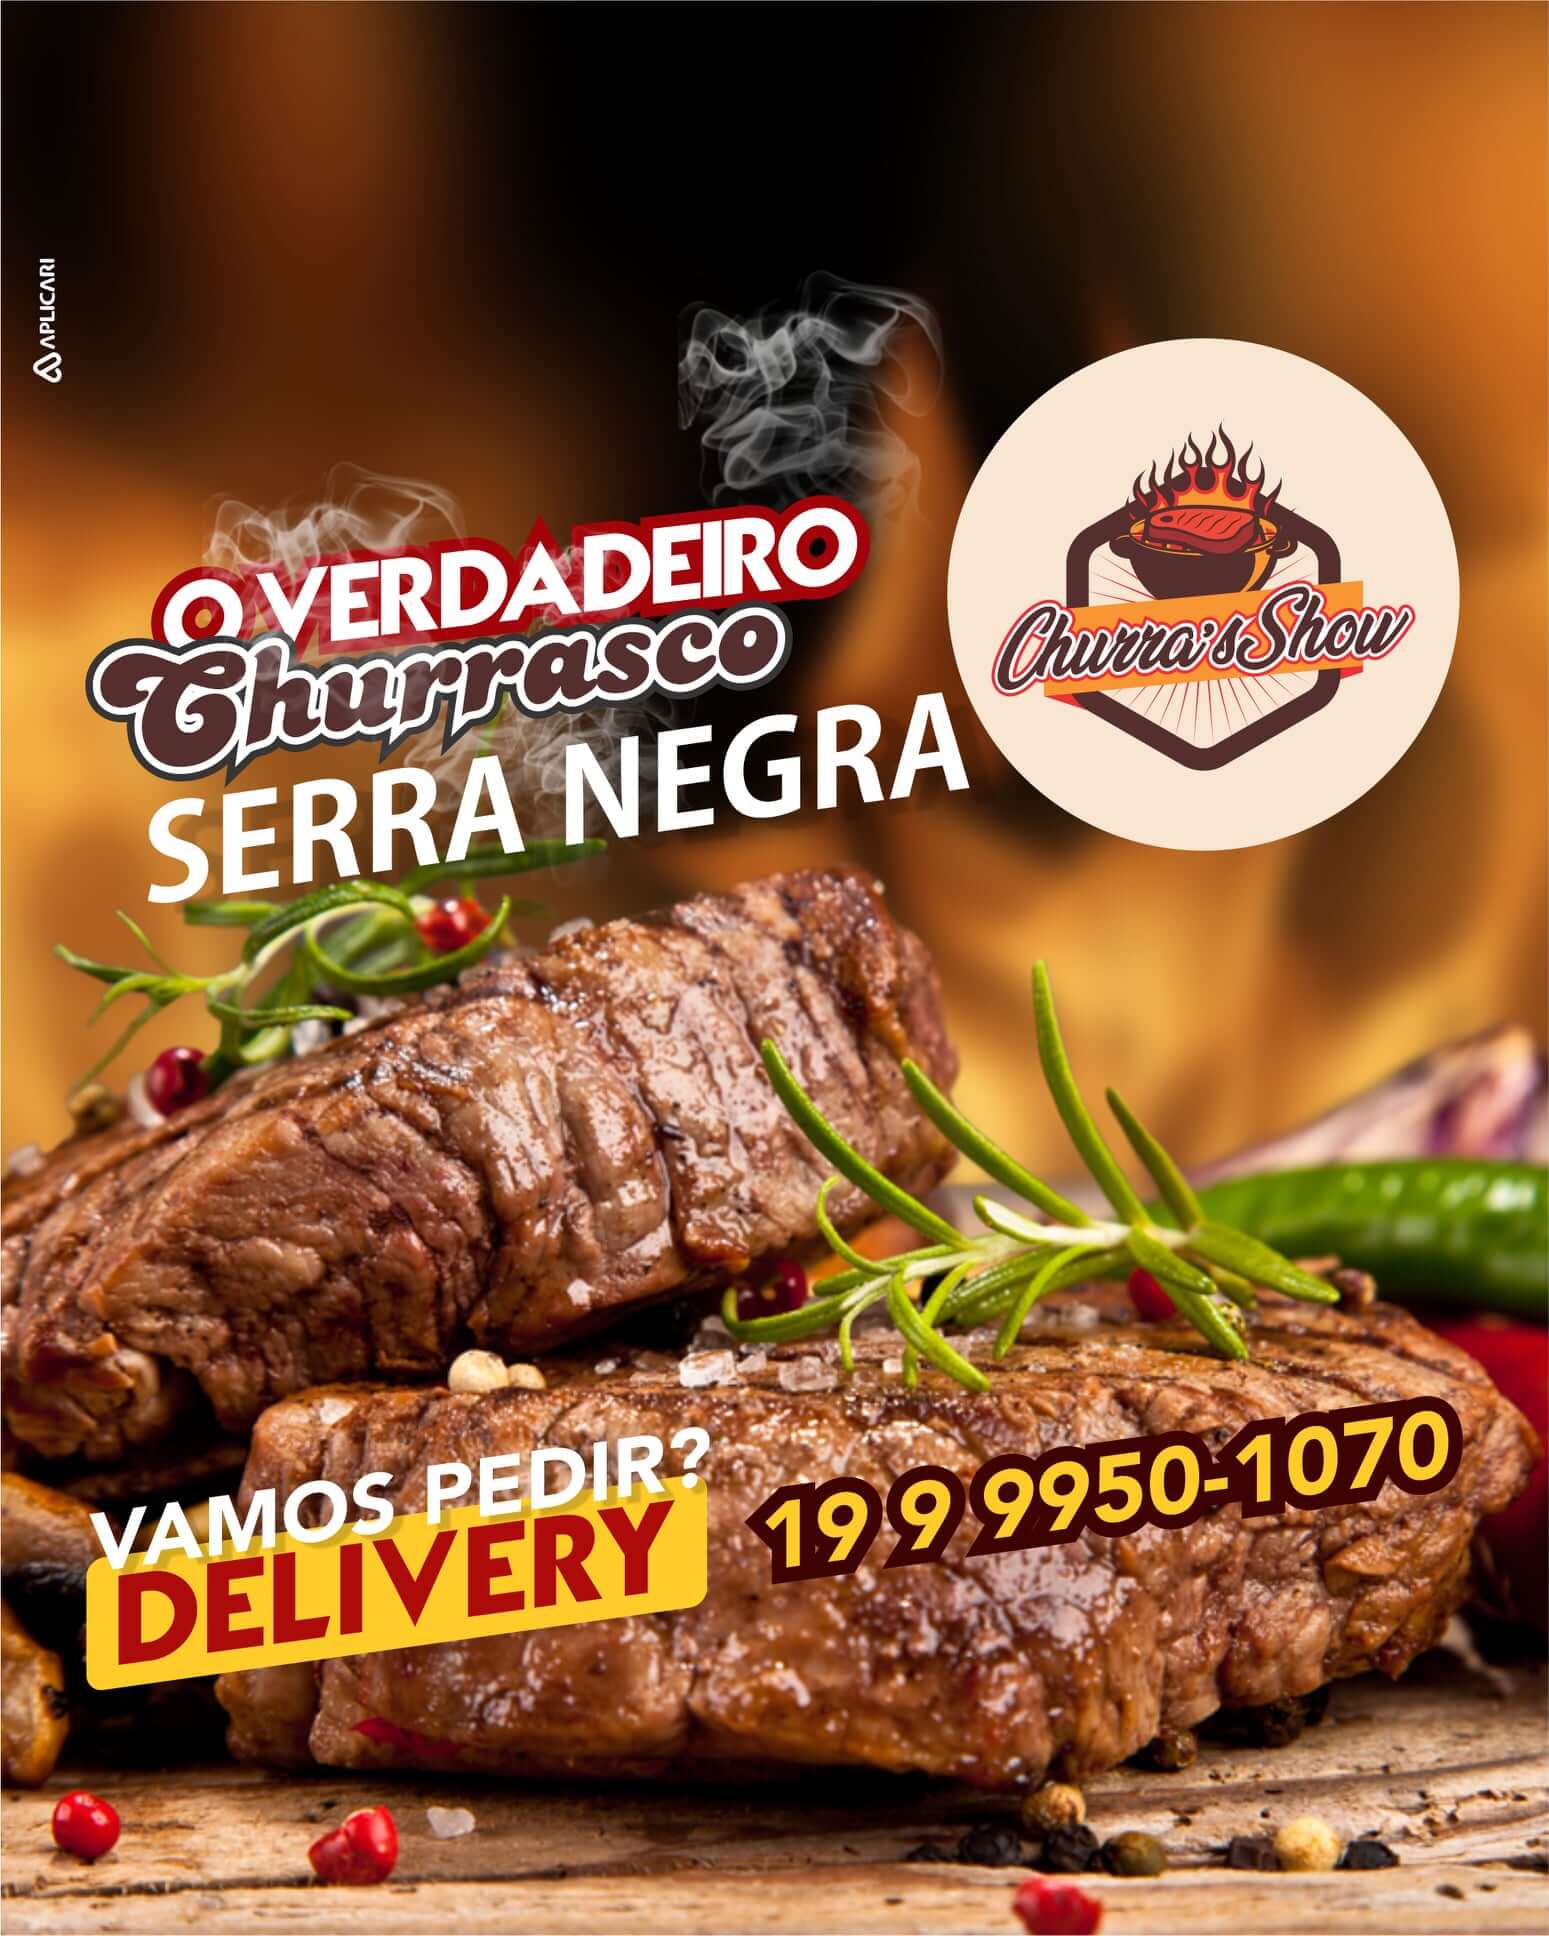 Churras Show Delivery